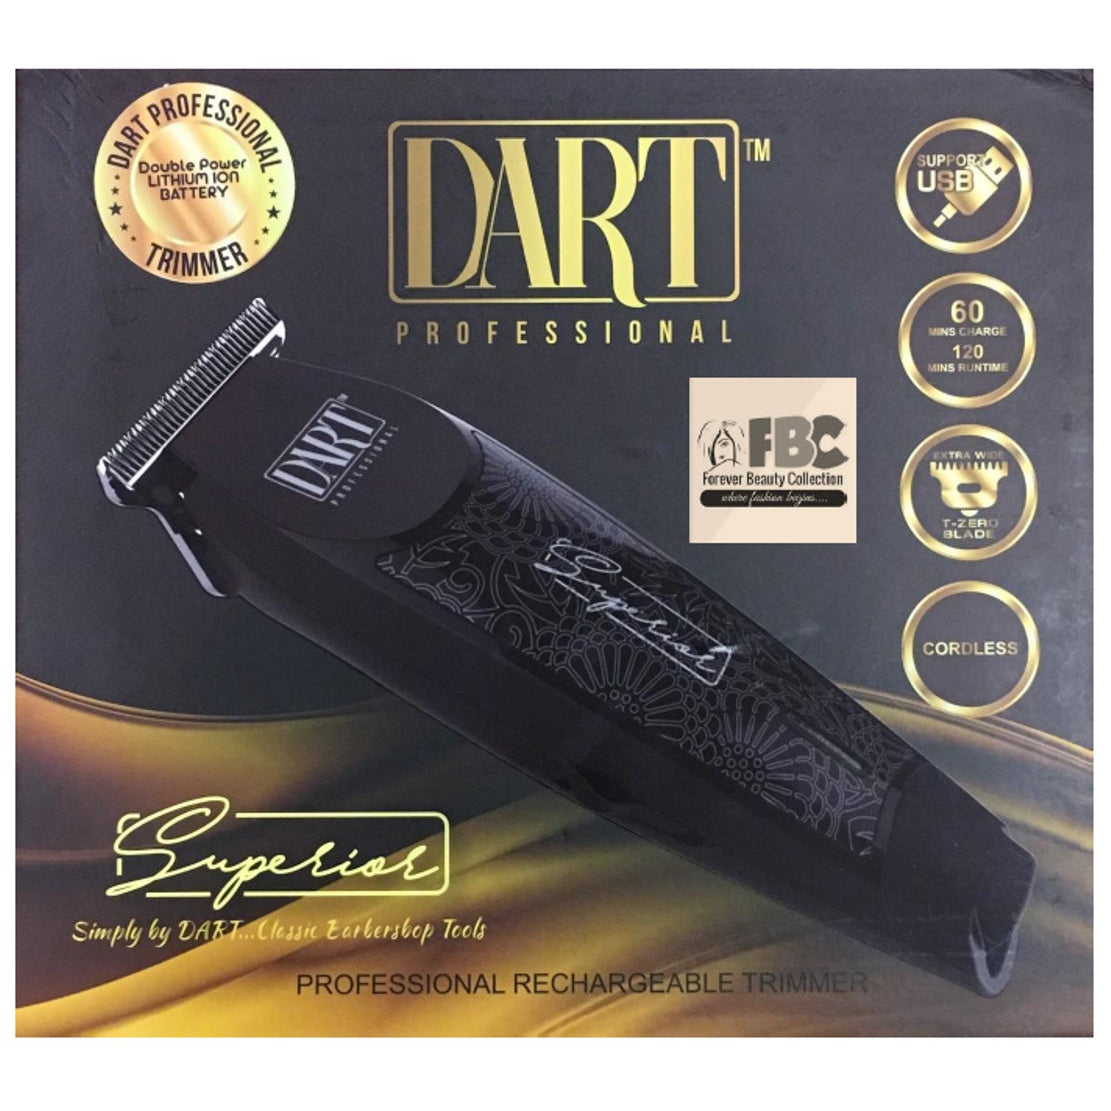 Dart SUPERIOR Cordless Trimmer with USB Charging 1